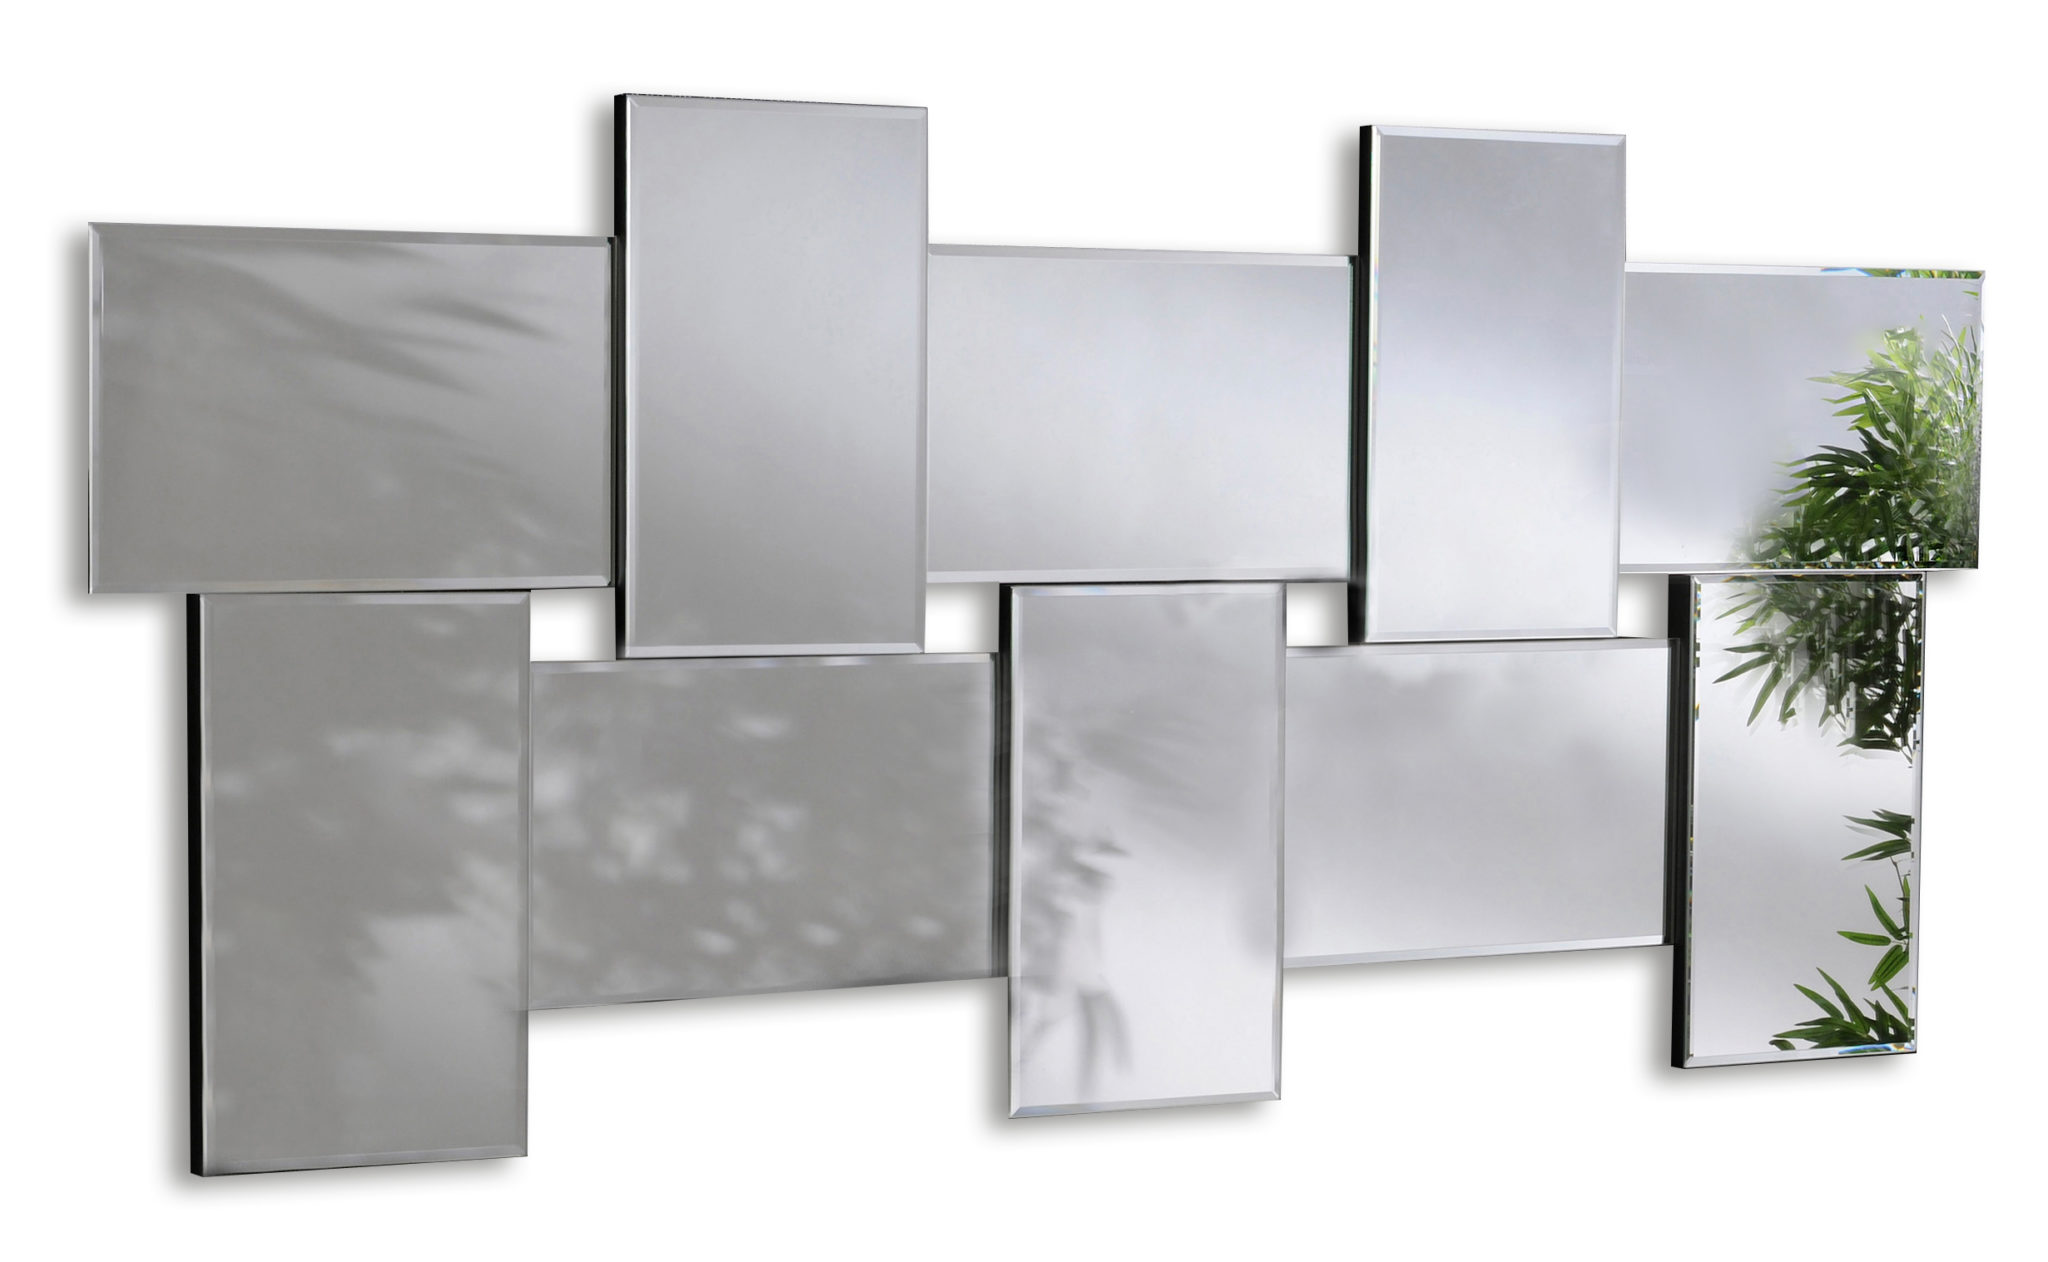 Ceres Large Modern Bevelled Wall Mirrors Bespoke Mirrors Art Deco Mirrors Custom Made Mirrors